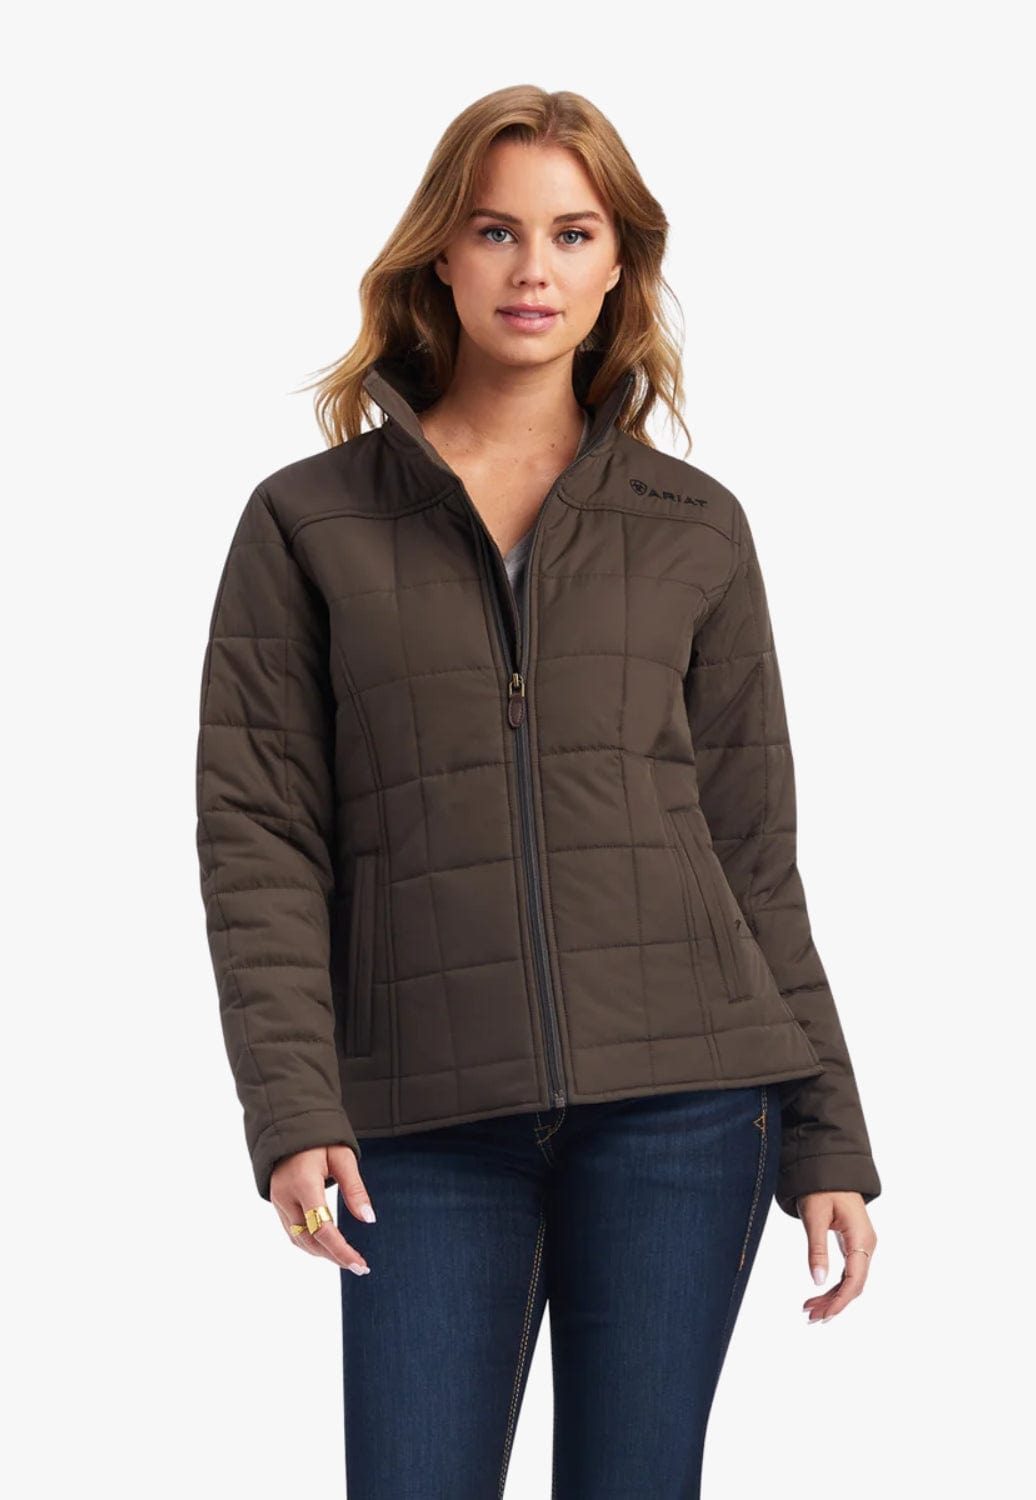 Ariat CLOTHING-Womens Jackets Ariat Womens REAL Crius Insulated Jacket